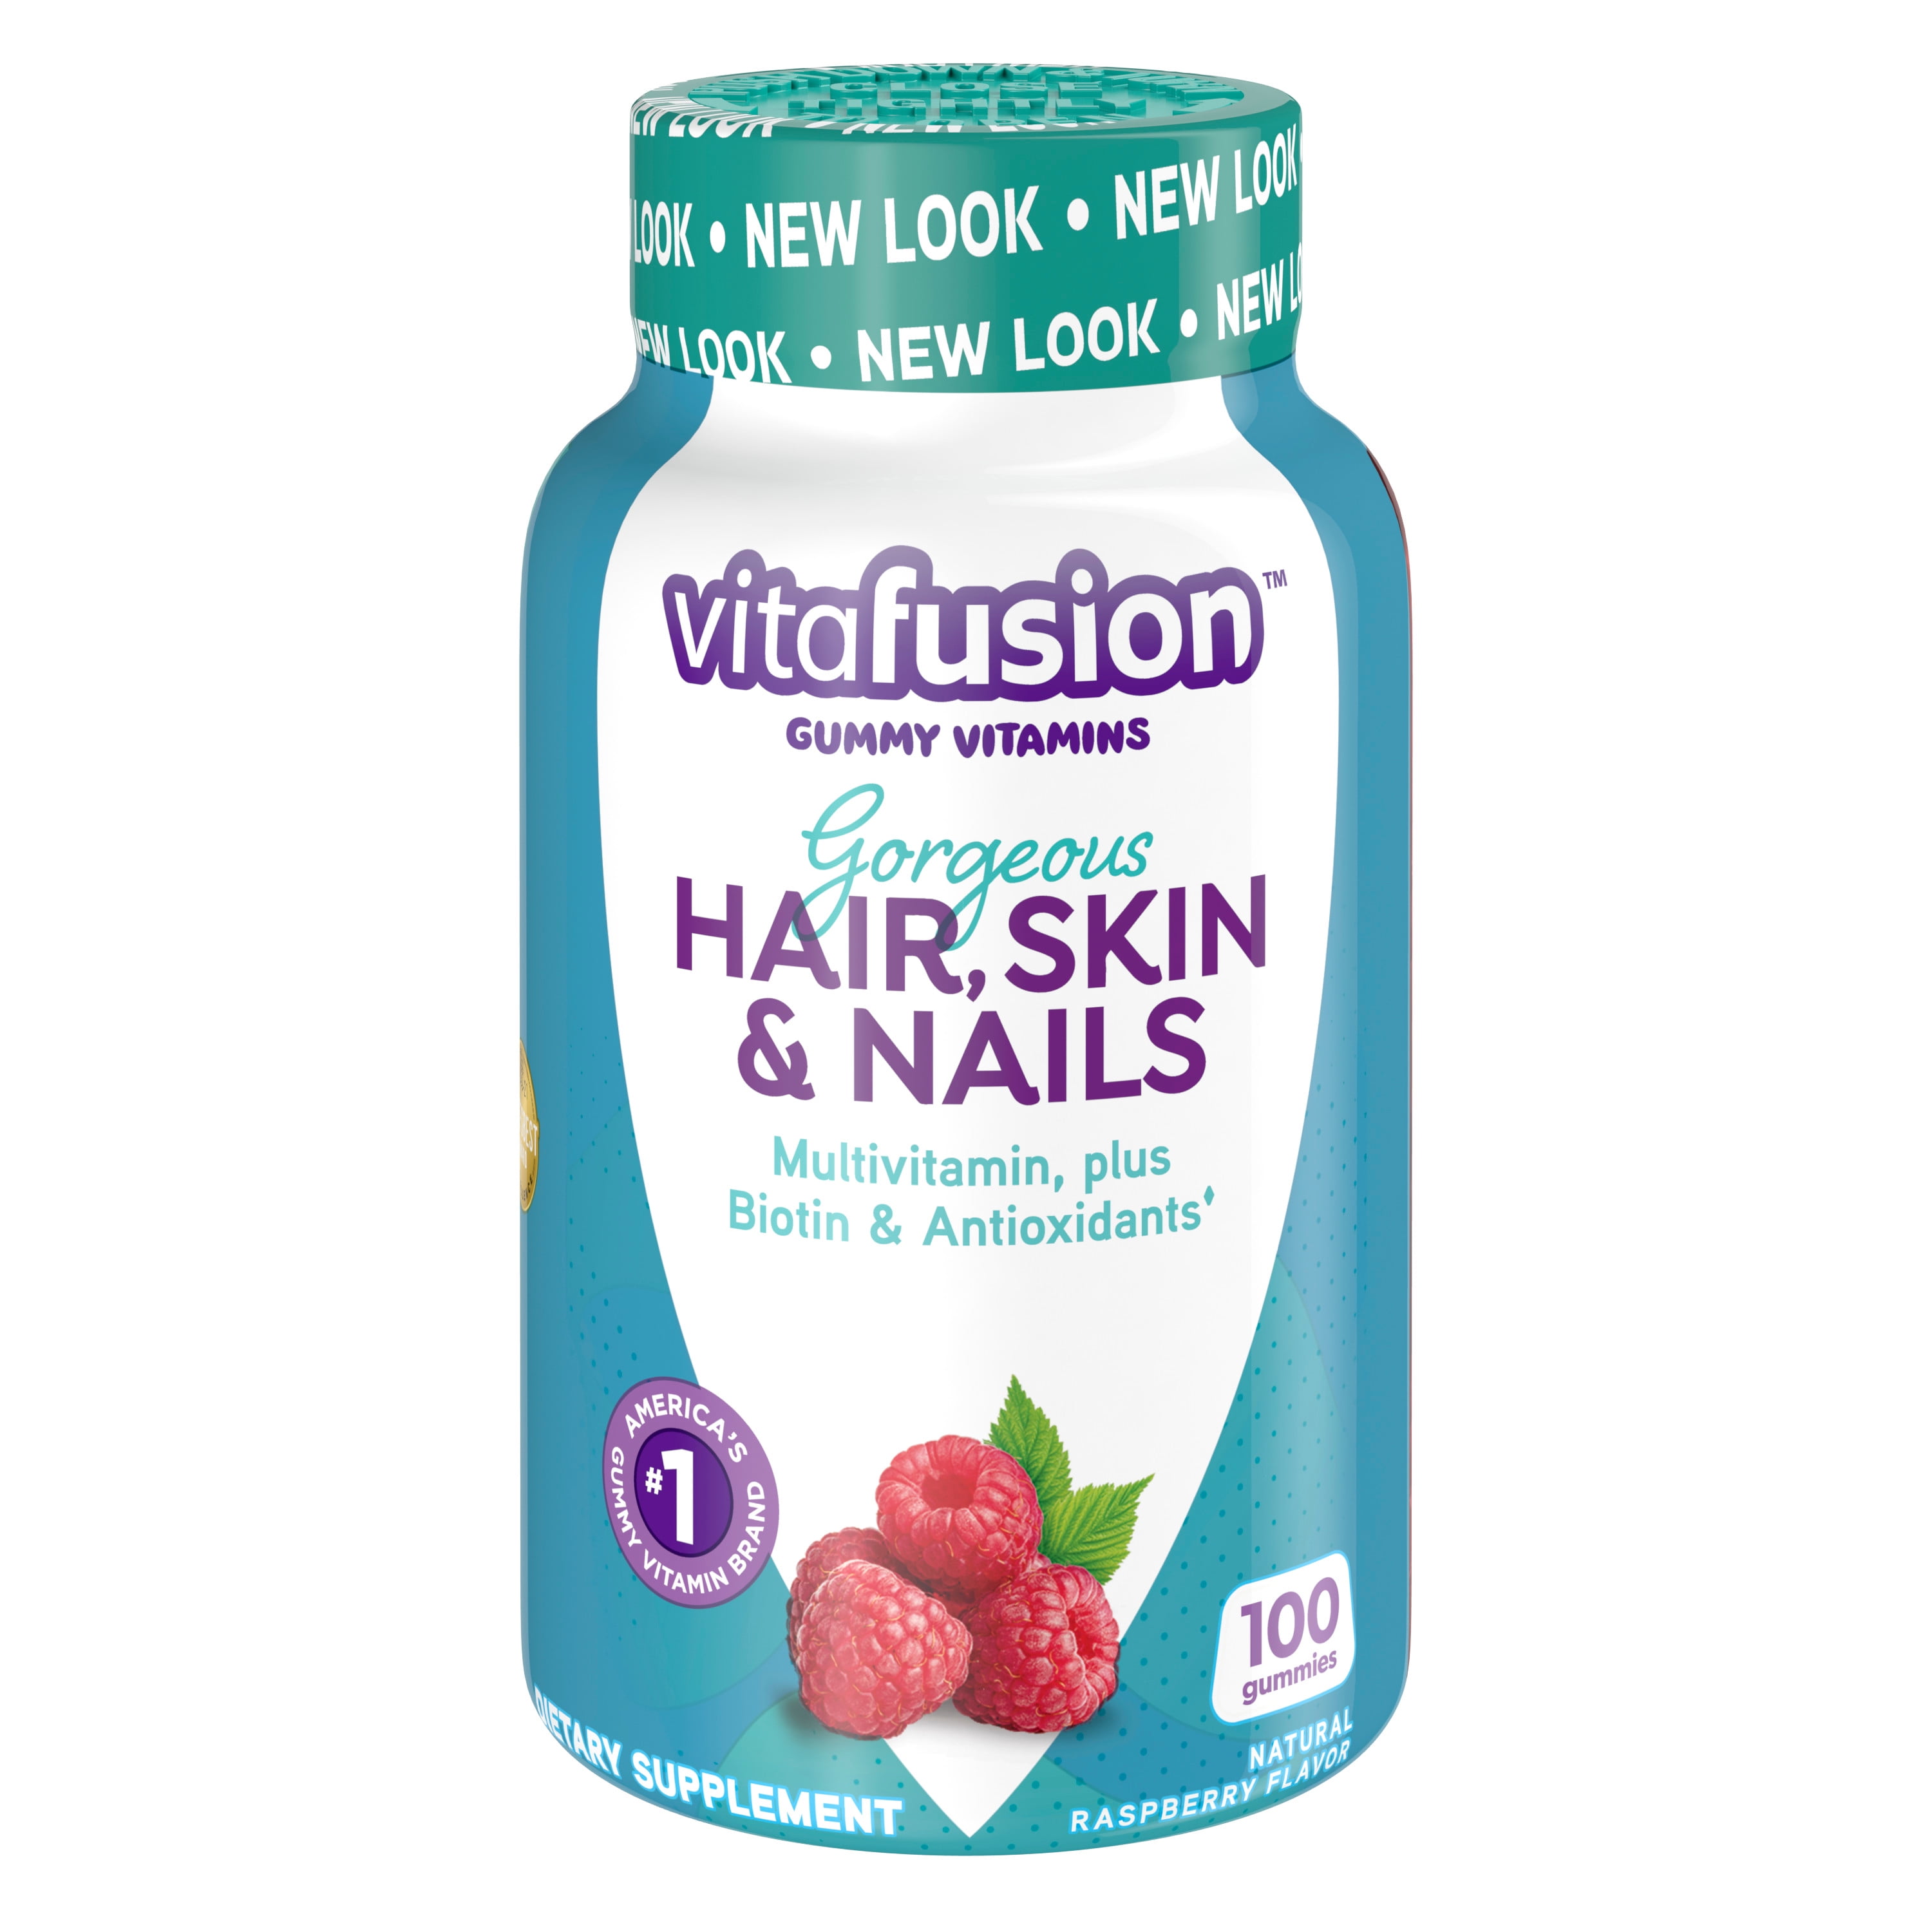 Vitafusion Gorgeous Hair, Skin  Nails Multivitamin Gummy Vitamins, plus Biotin and Antioxidant vitamins CE, Raspberry Flavor, 100ct (33 day supply), from Americas Number One Gummy Vitamin Brand